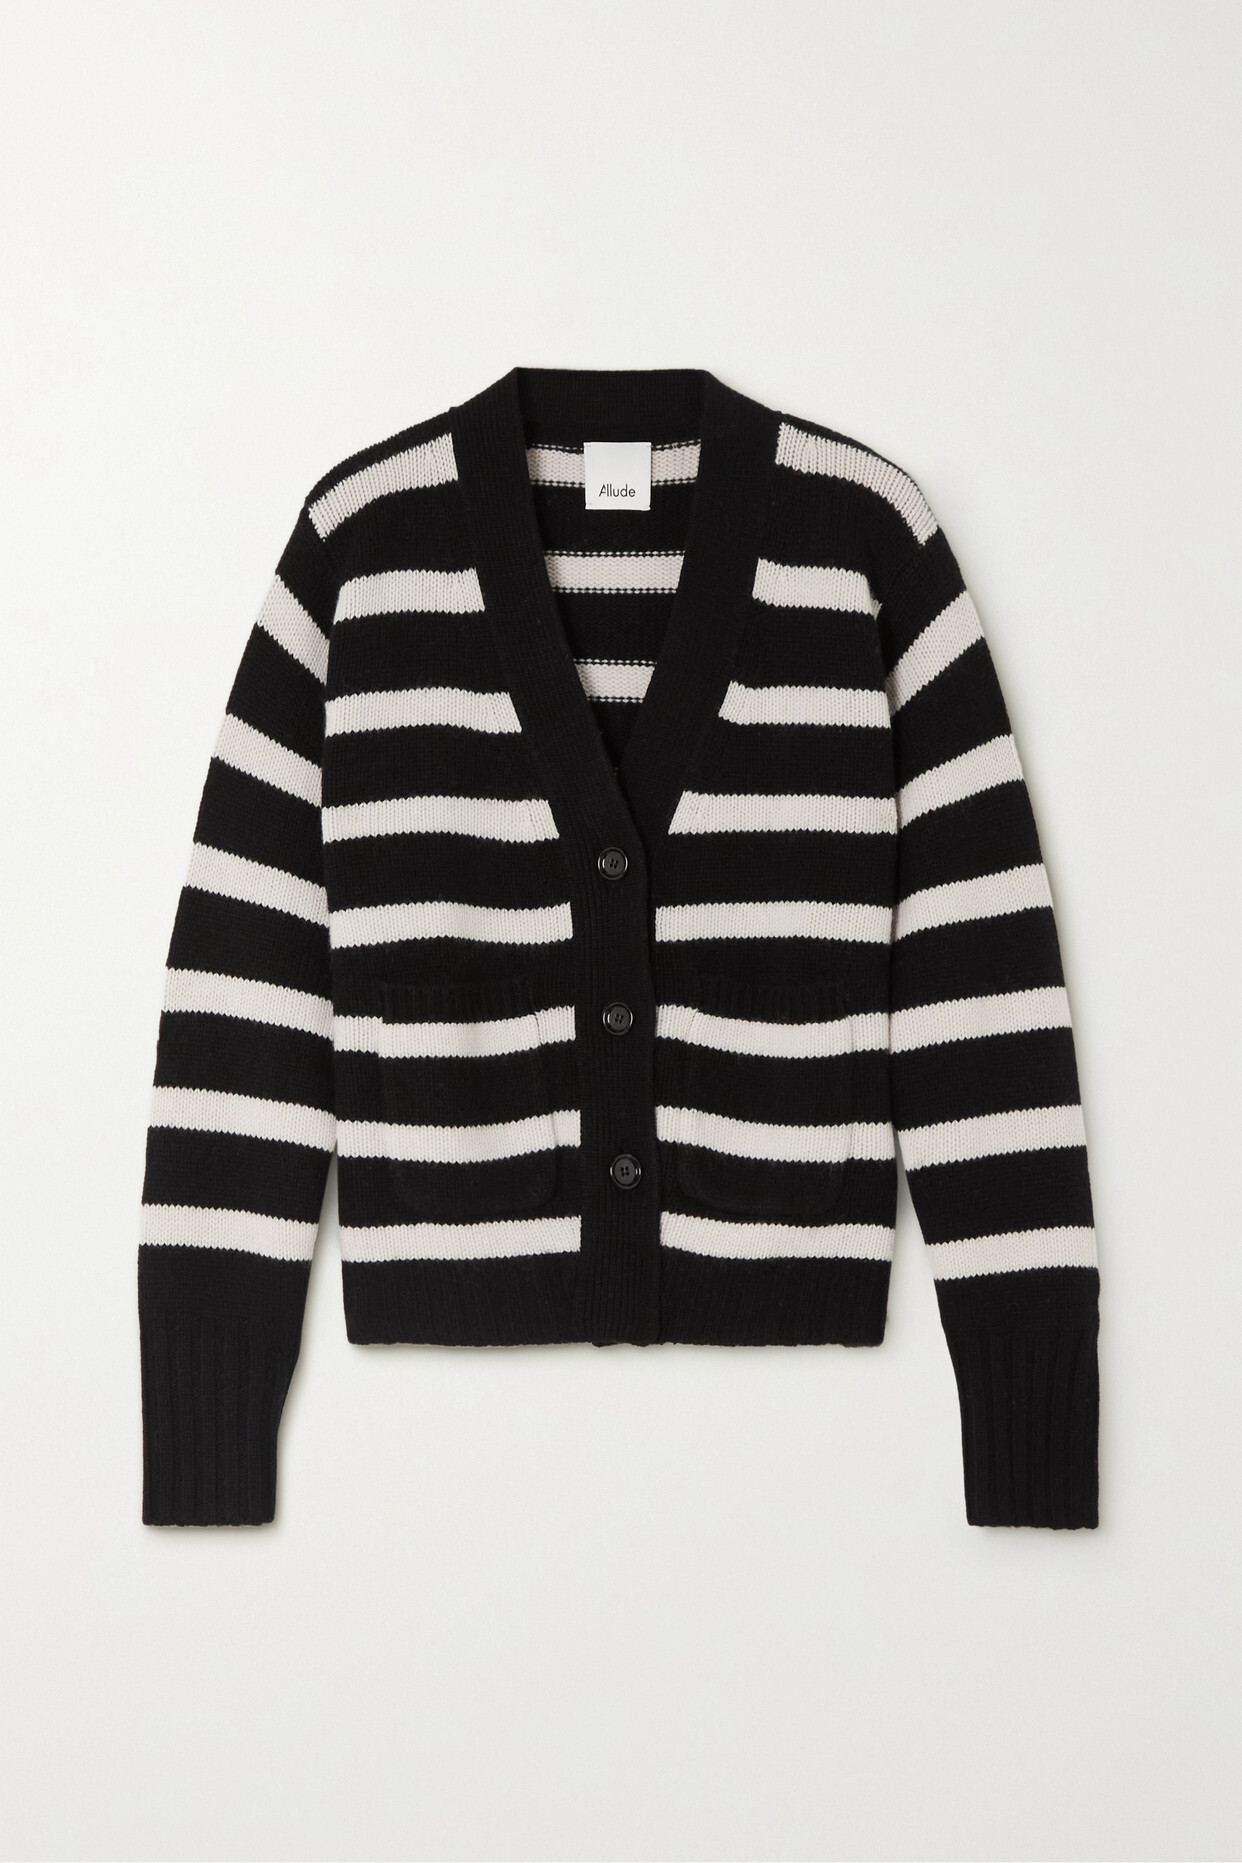 Allude - Striped Wool And Cashmere-blend Cardigan - Black